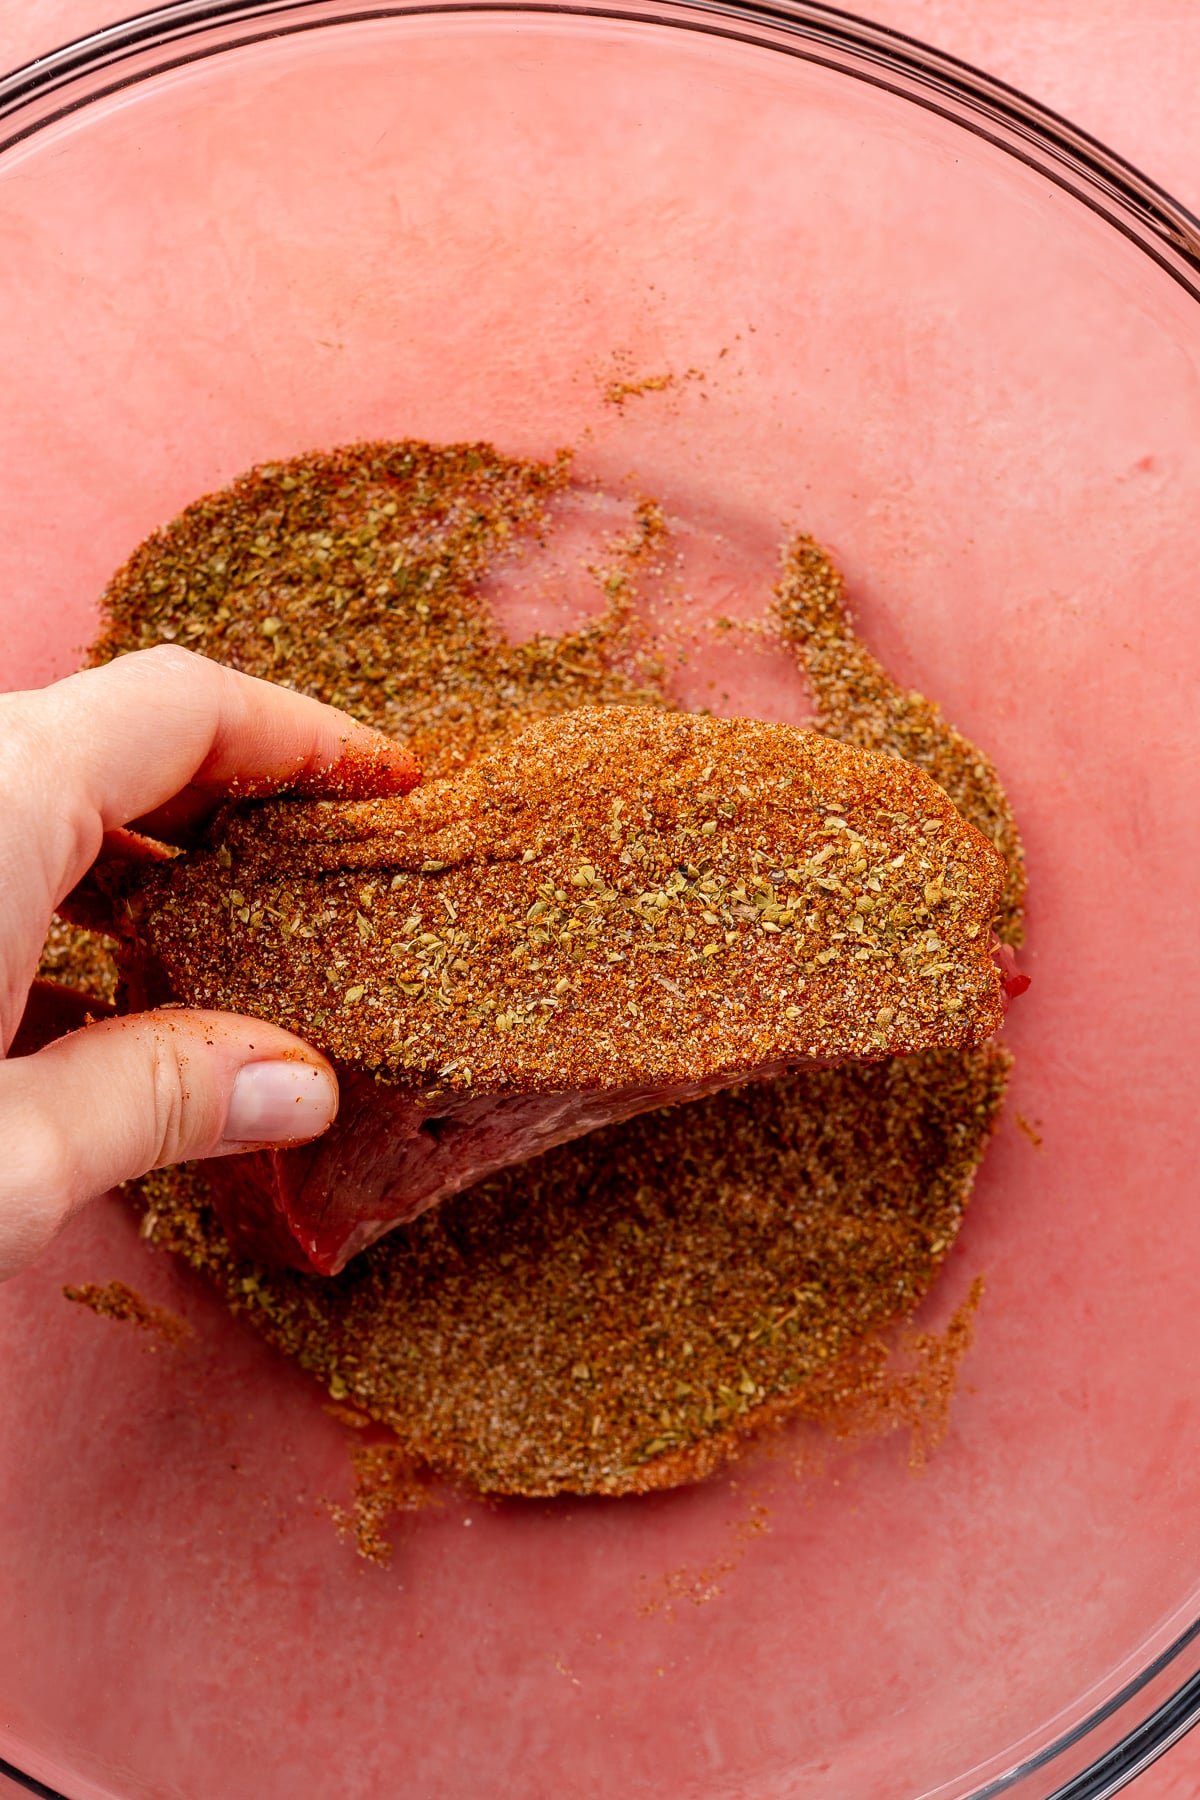 A hand is shown rolling a rectangular piece of beef brisket in a glass bowl of mixed spices.